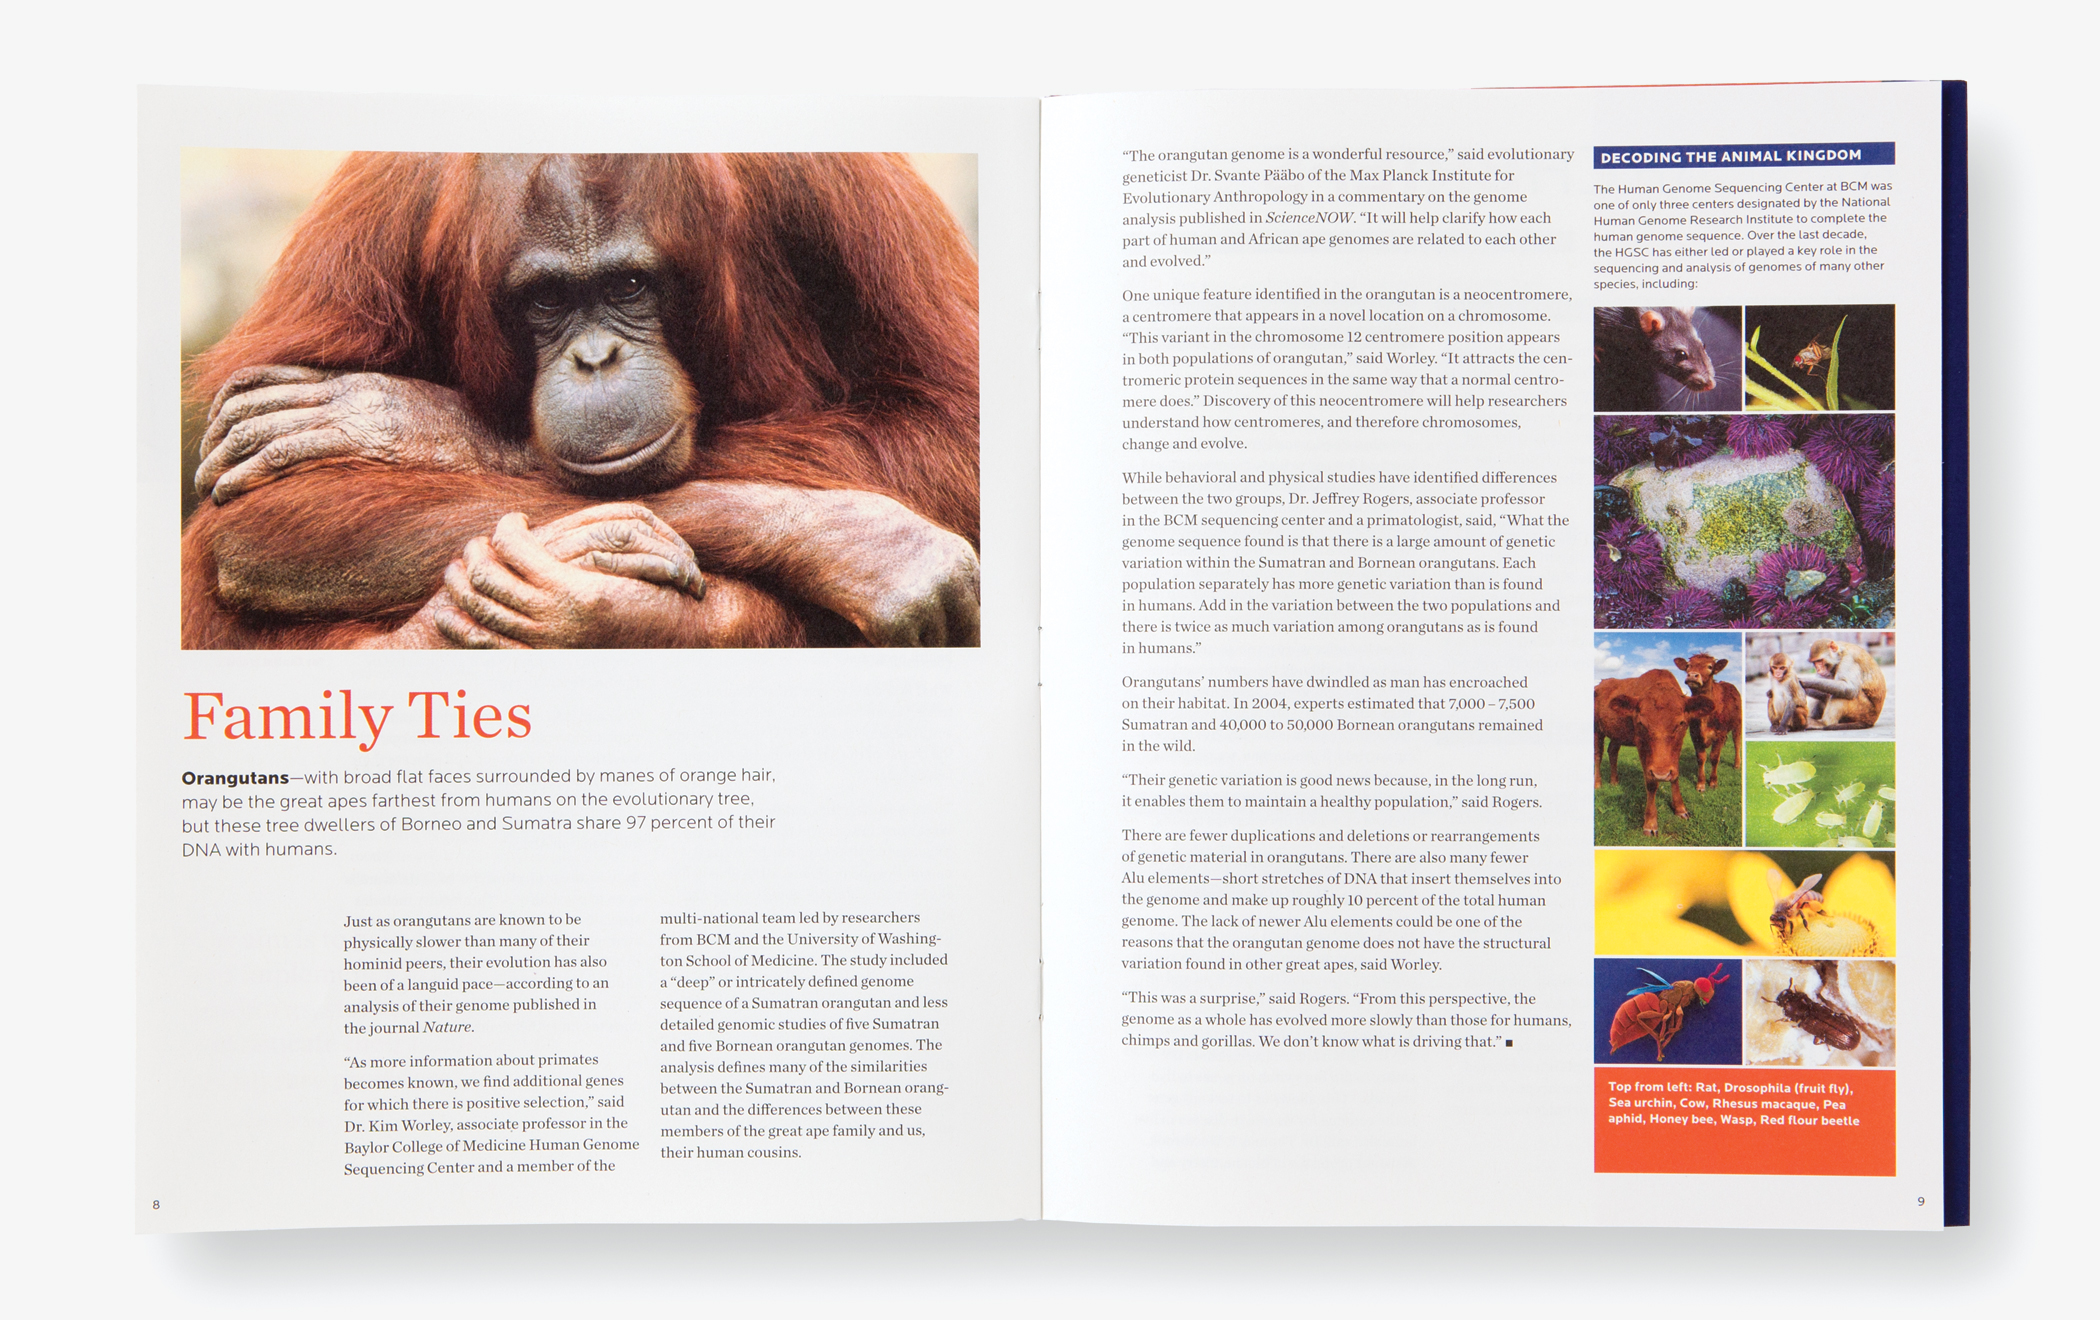 Pages from BCM Quarterly report with the title "Family Ties," main image of orangutans, and photos of other animals.